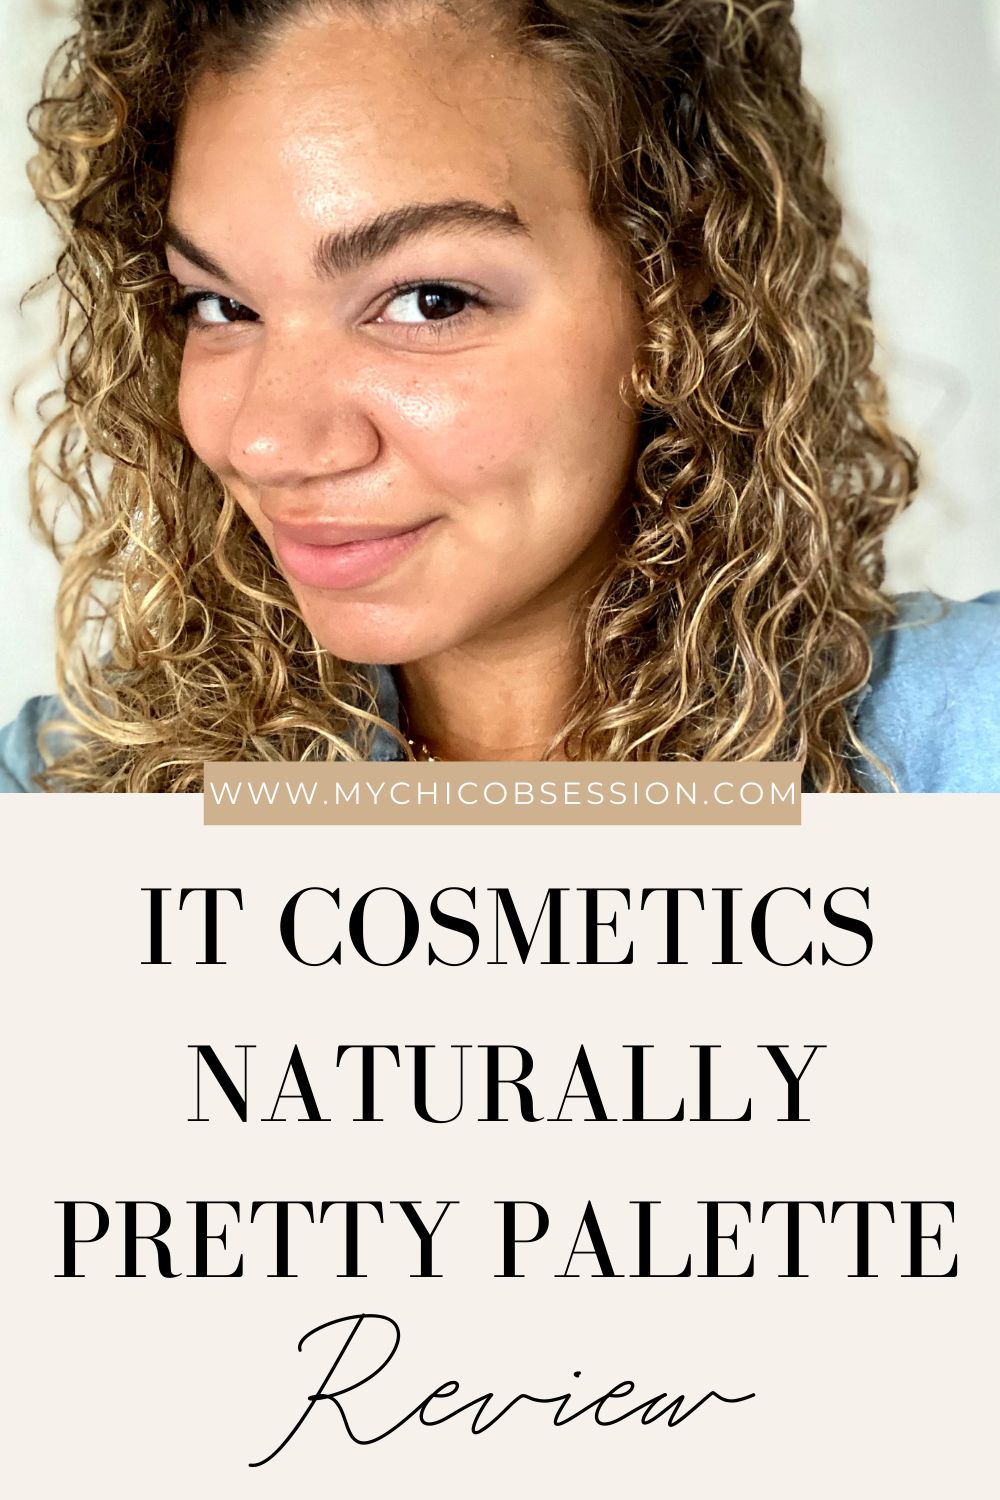 IT Cosmetics Naturally Pretty Palette Review 